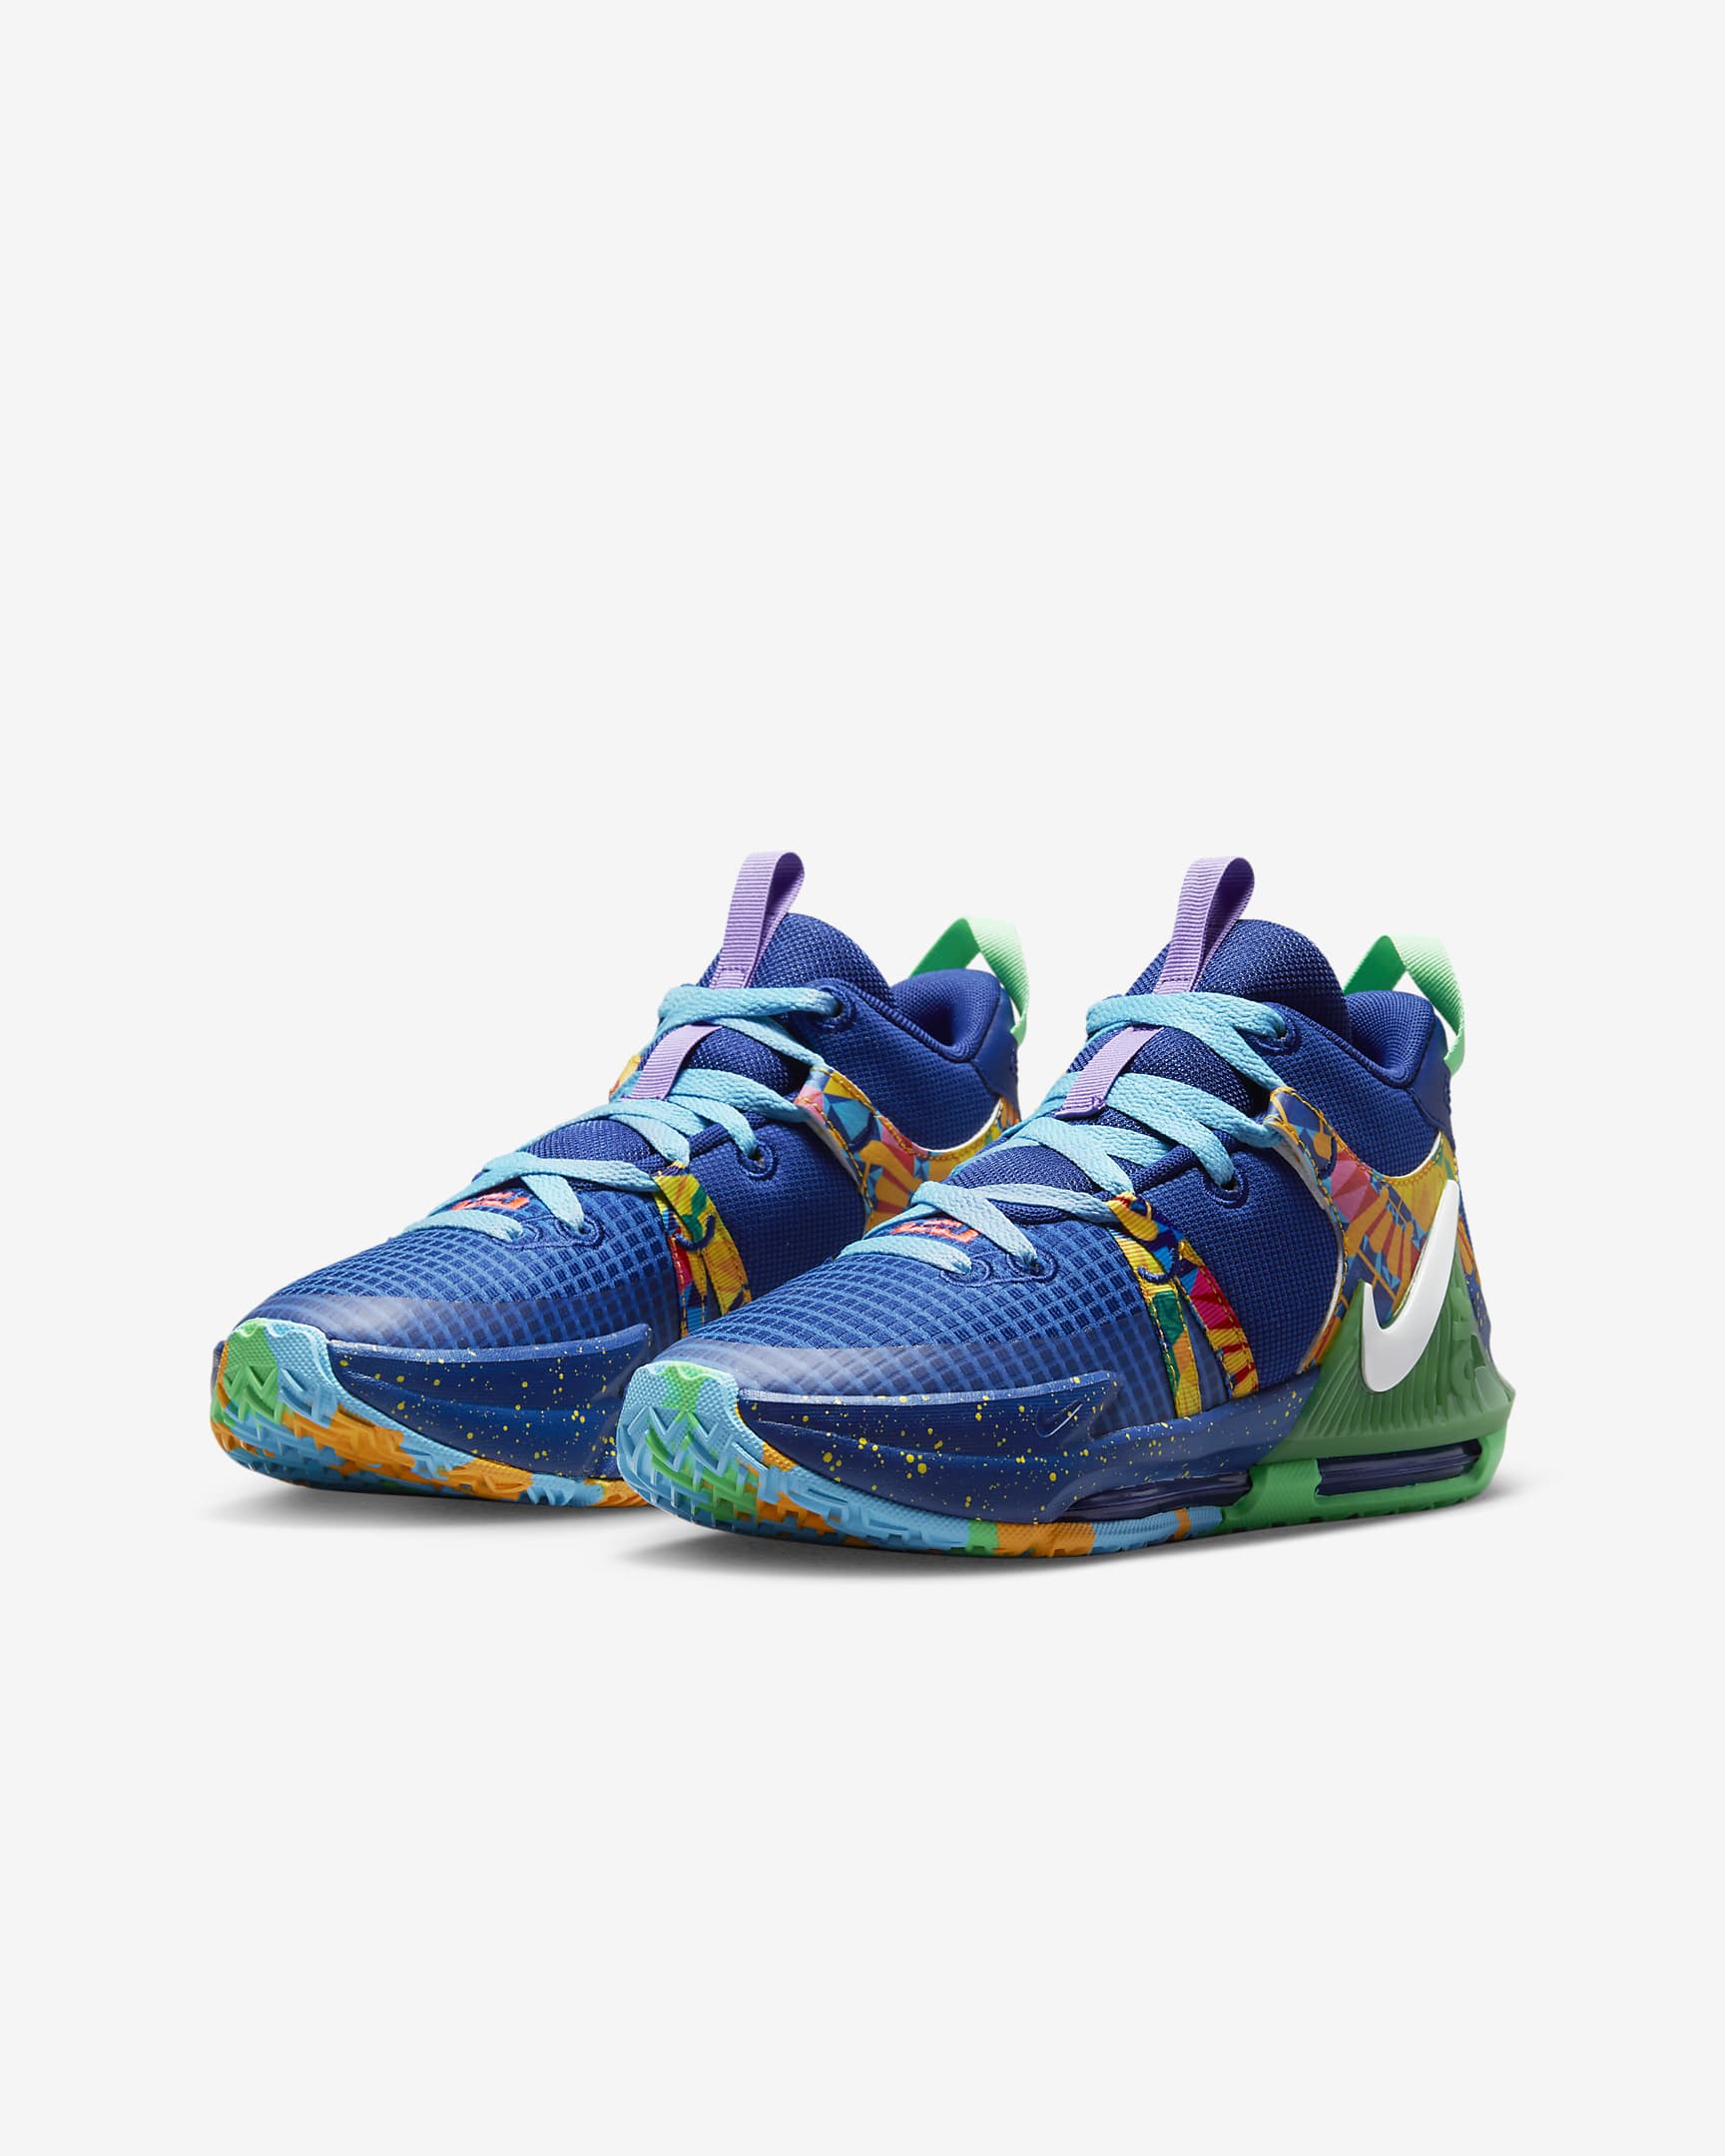 LEBRON WITNESS GS - DQ8650